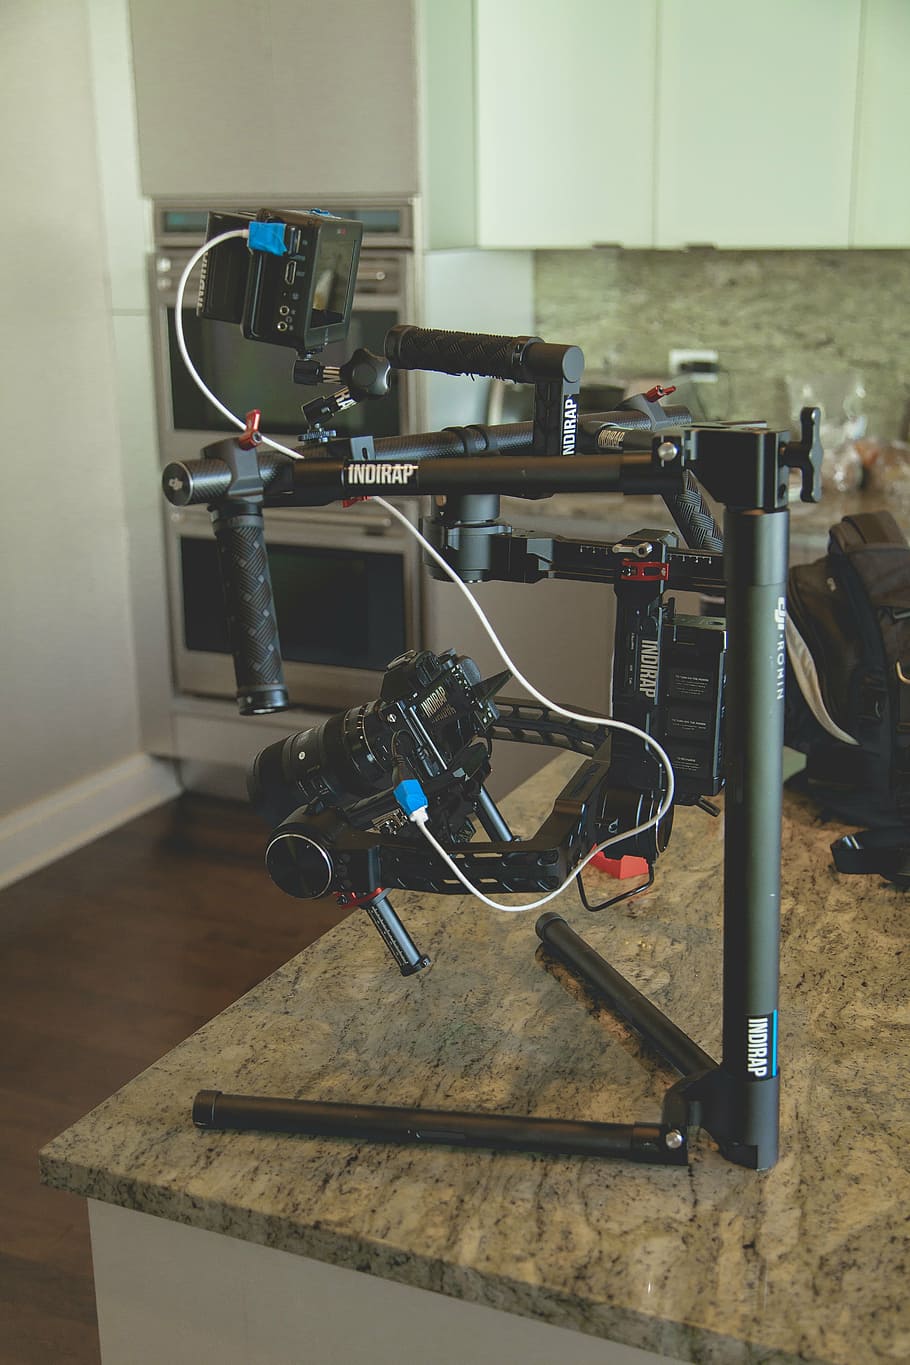 dji, ronin, stabilizer, camera, a7s, 3-axis, gimbal, videography, cinematography, kitchen